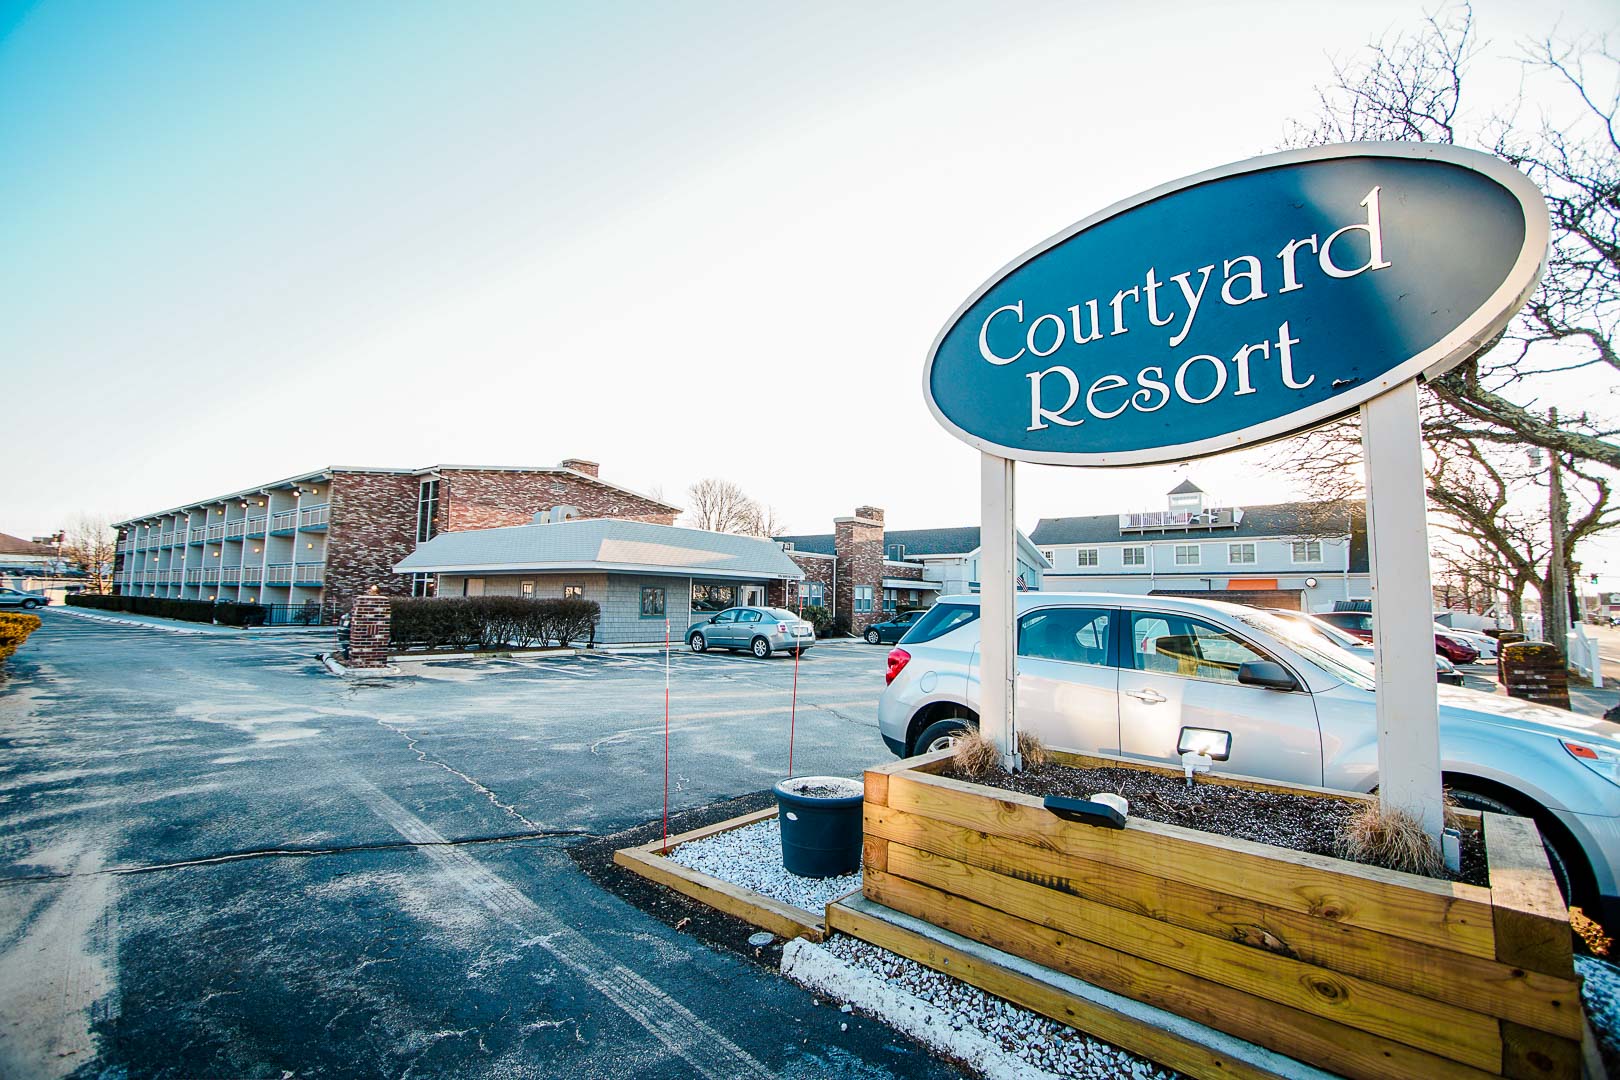 A welcoming resort entrance at VRI's Courtyard Resort in Massachusetts.